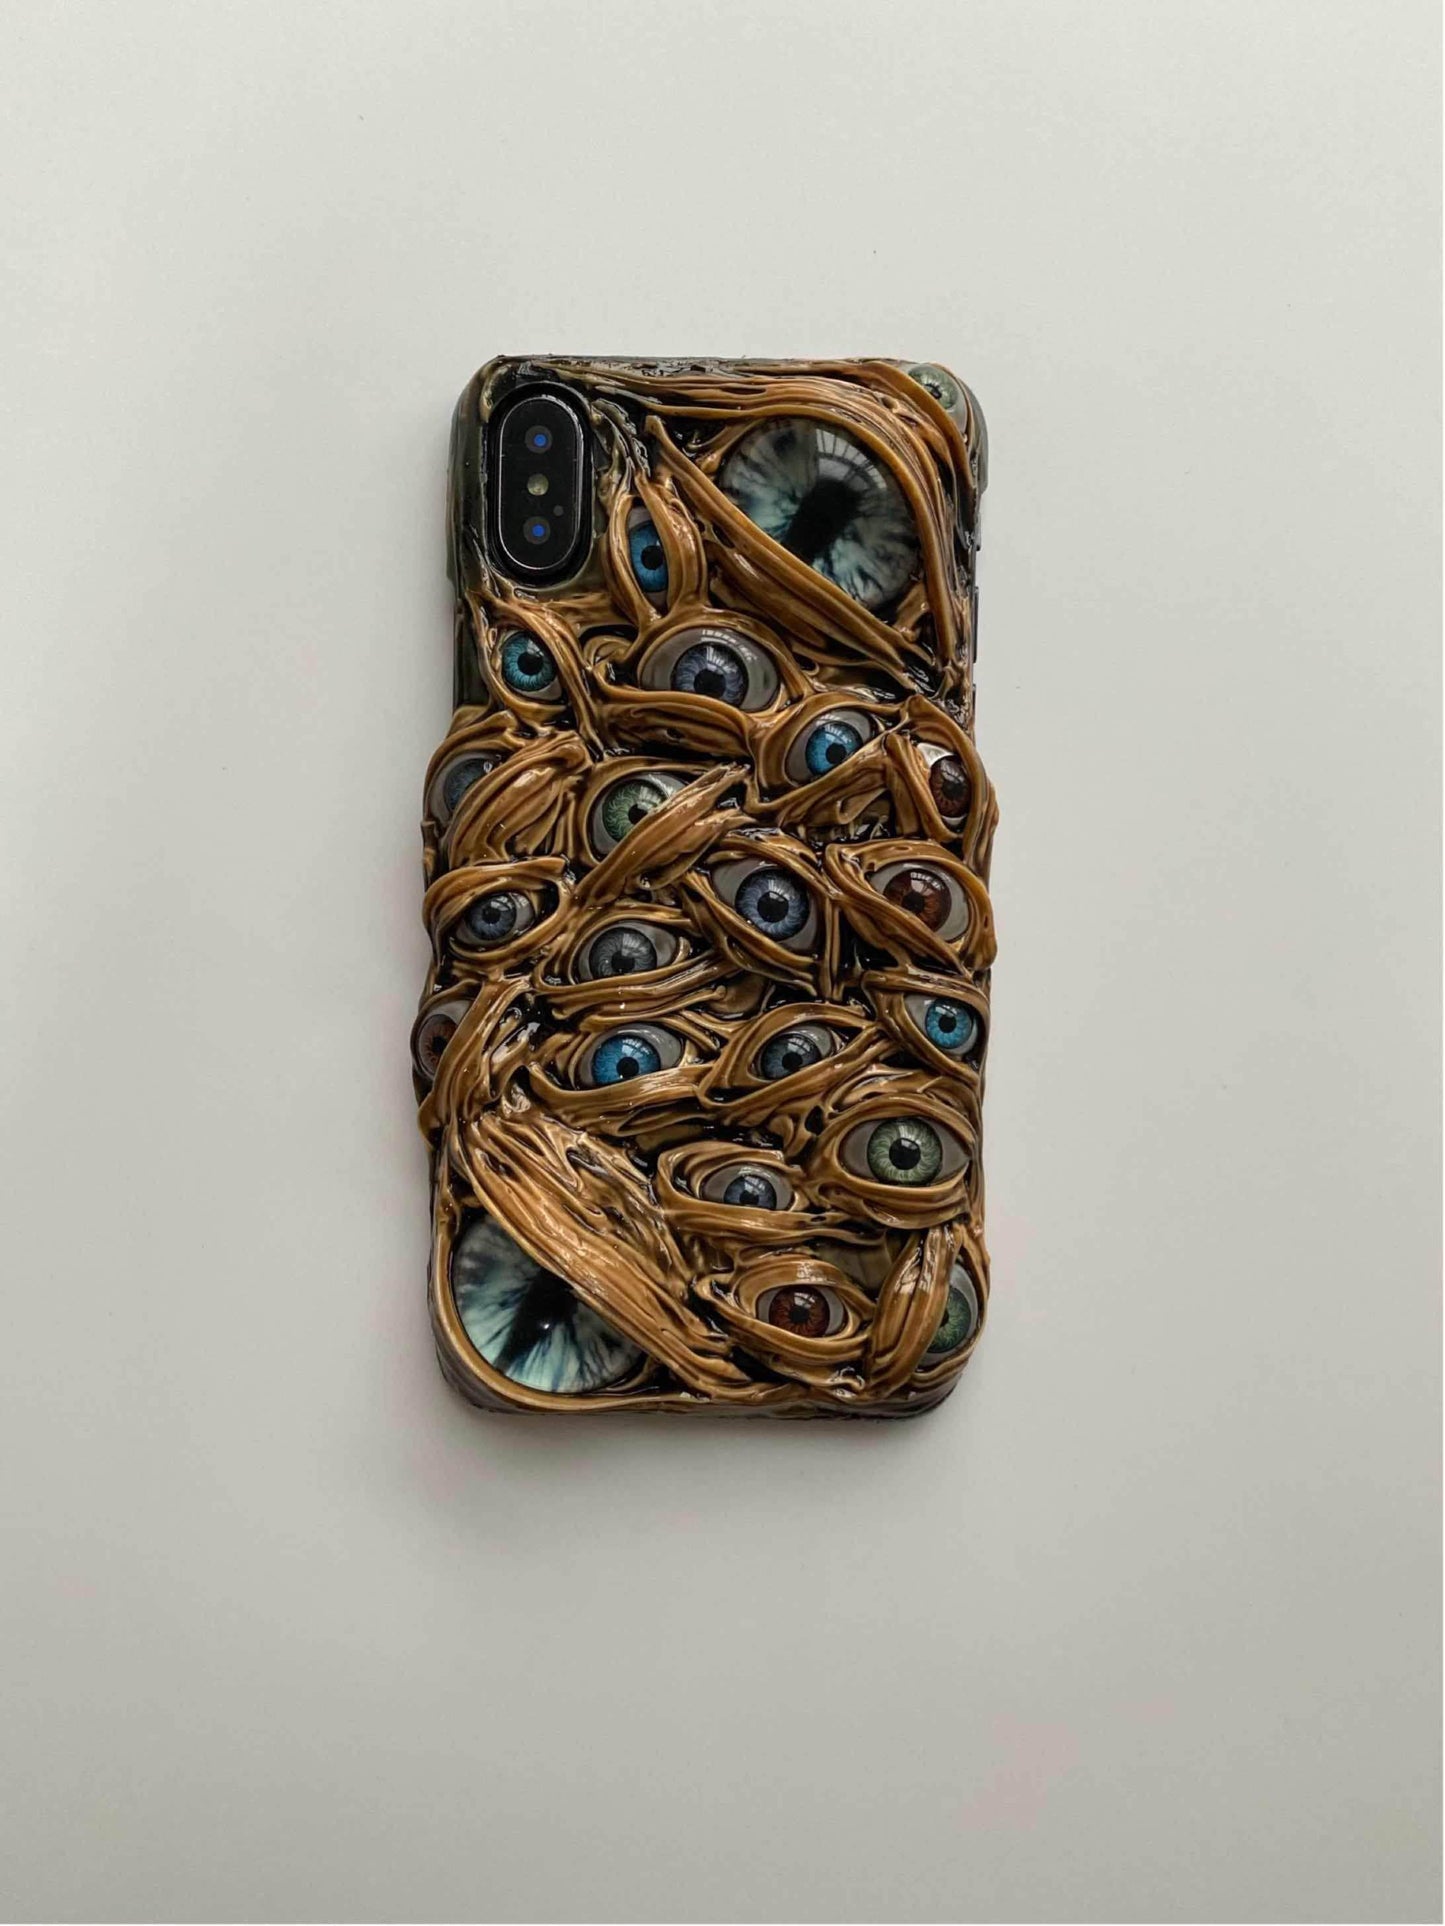 The Eyes Glow in the Dark Handmade Designer iPhone Case For iPhone SE 11 Pro Max X XS Max XR 7 8 Plus - techypopcom